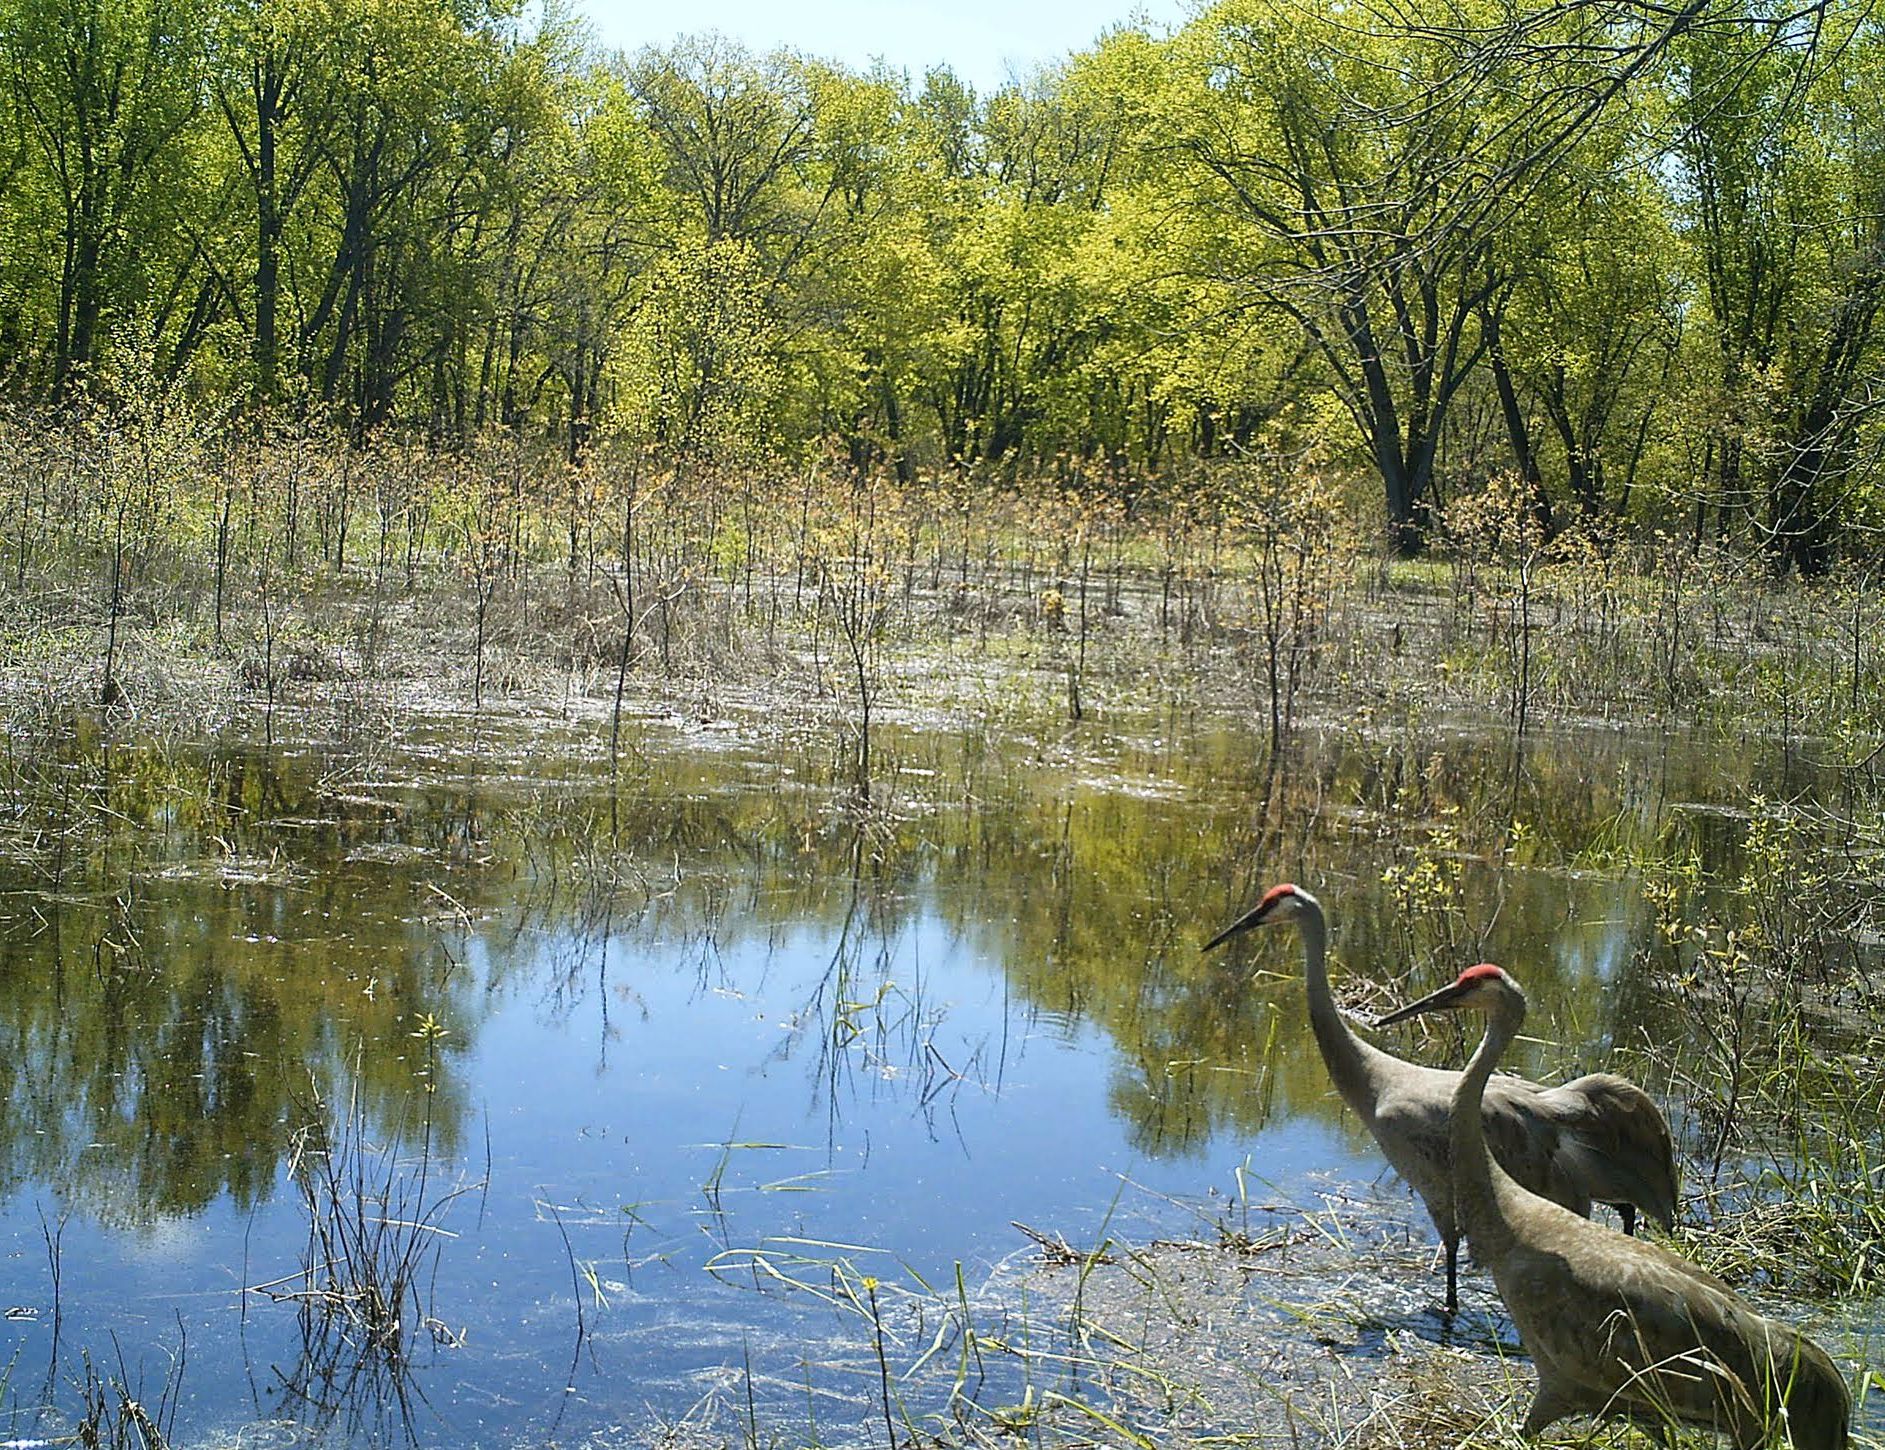 cranes in a young floodplain forest